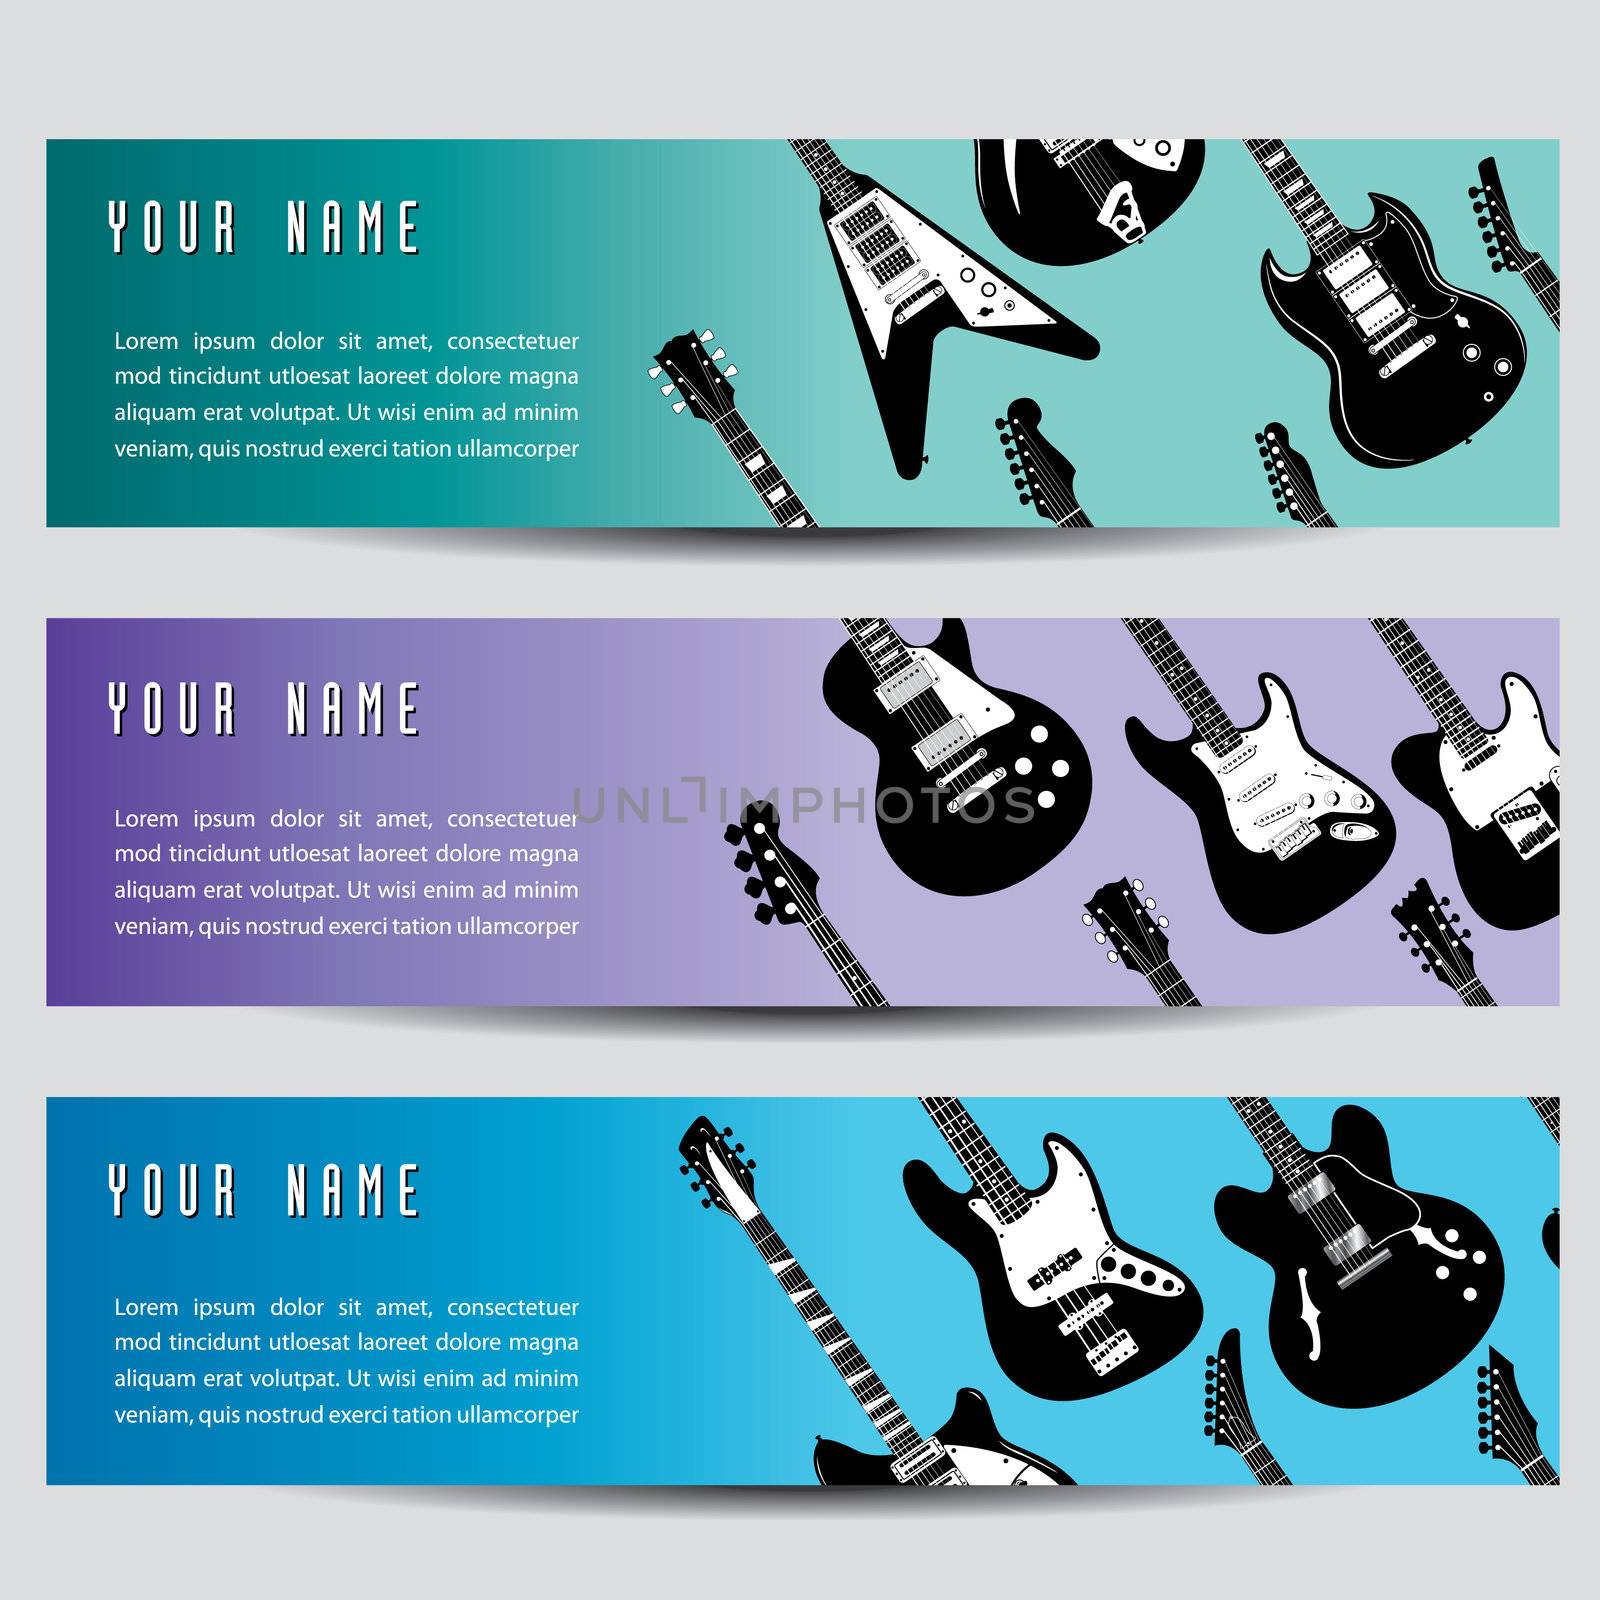 A set of three guitar banners